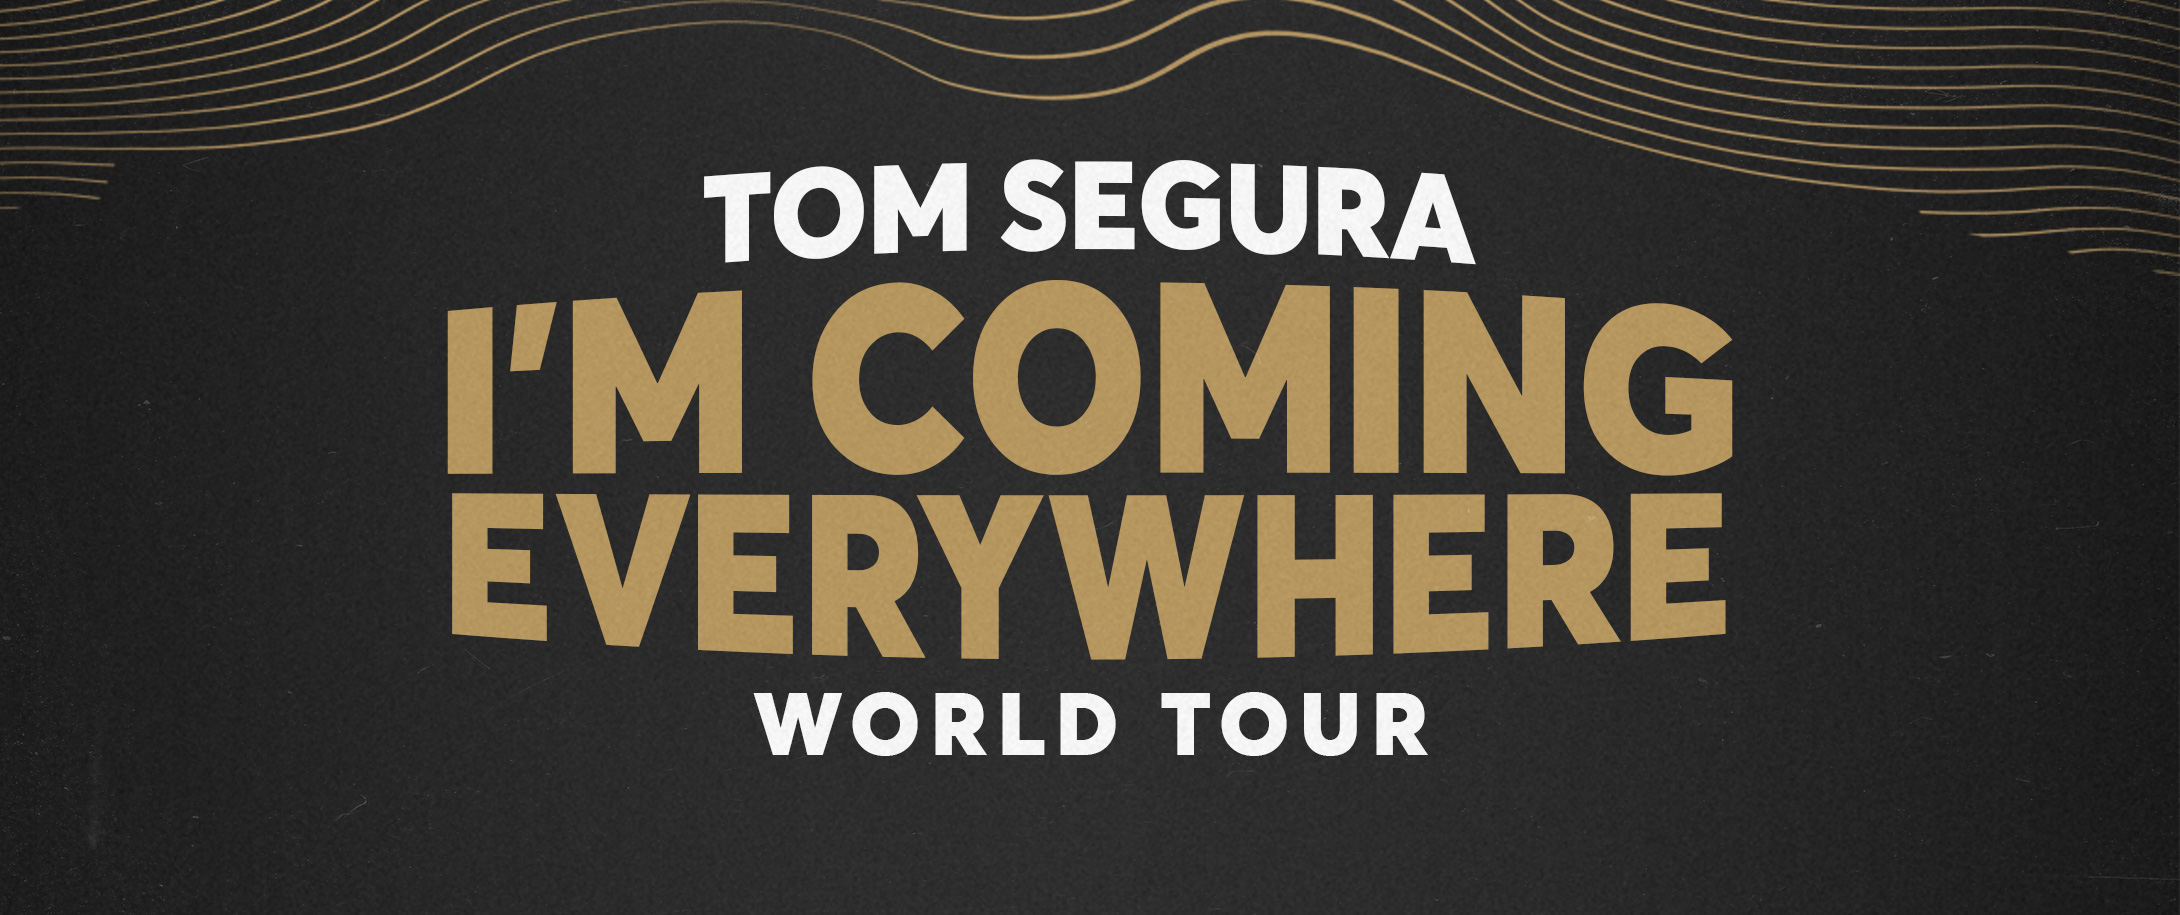 SOLD OUT - Tom Segura 